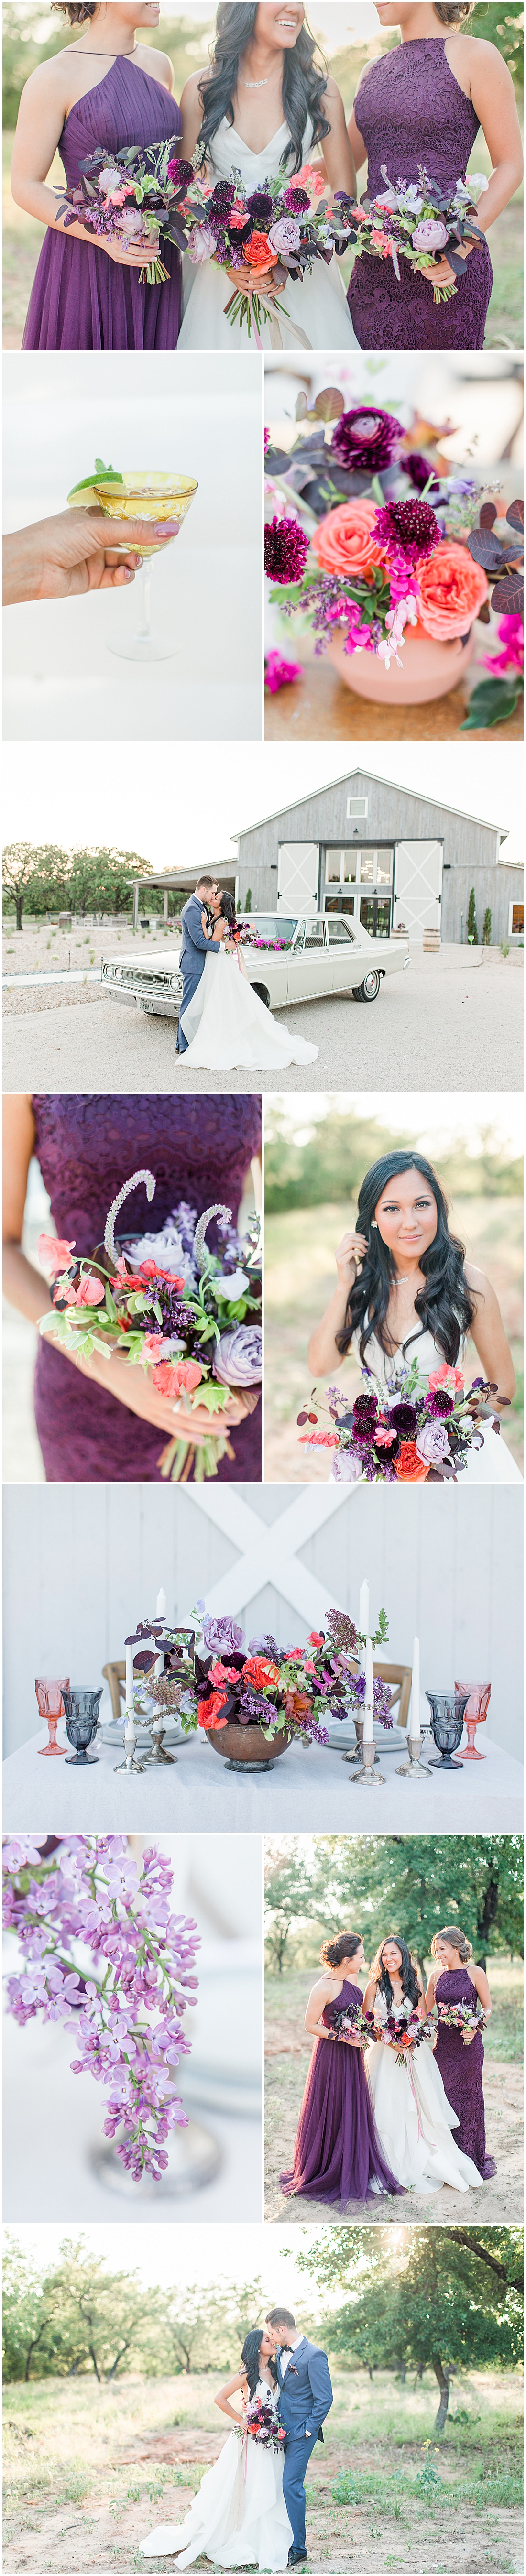 the barn at swallows eve wedding venue in fredericksburg texas photo inspiration featured on Grey Likes Weddings 0003 1